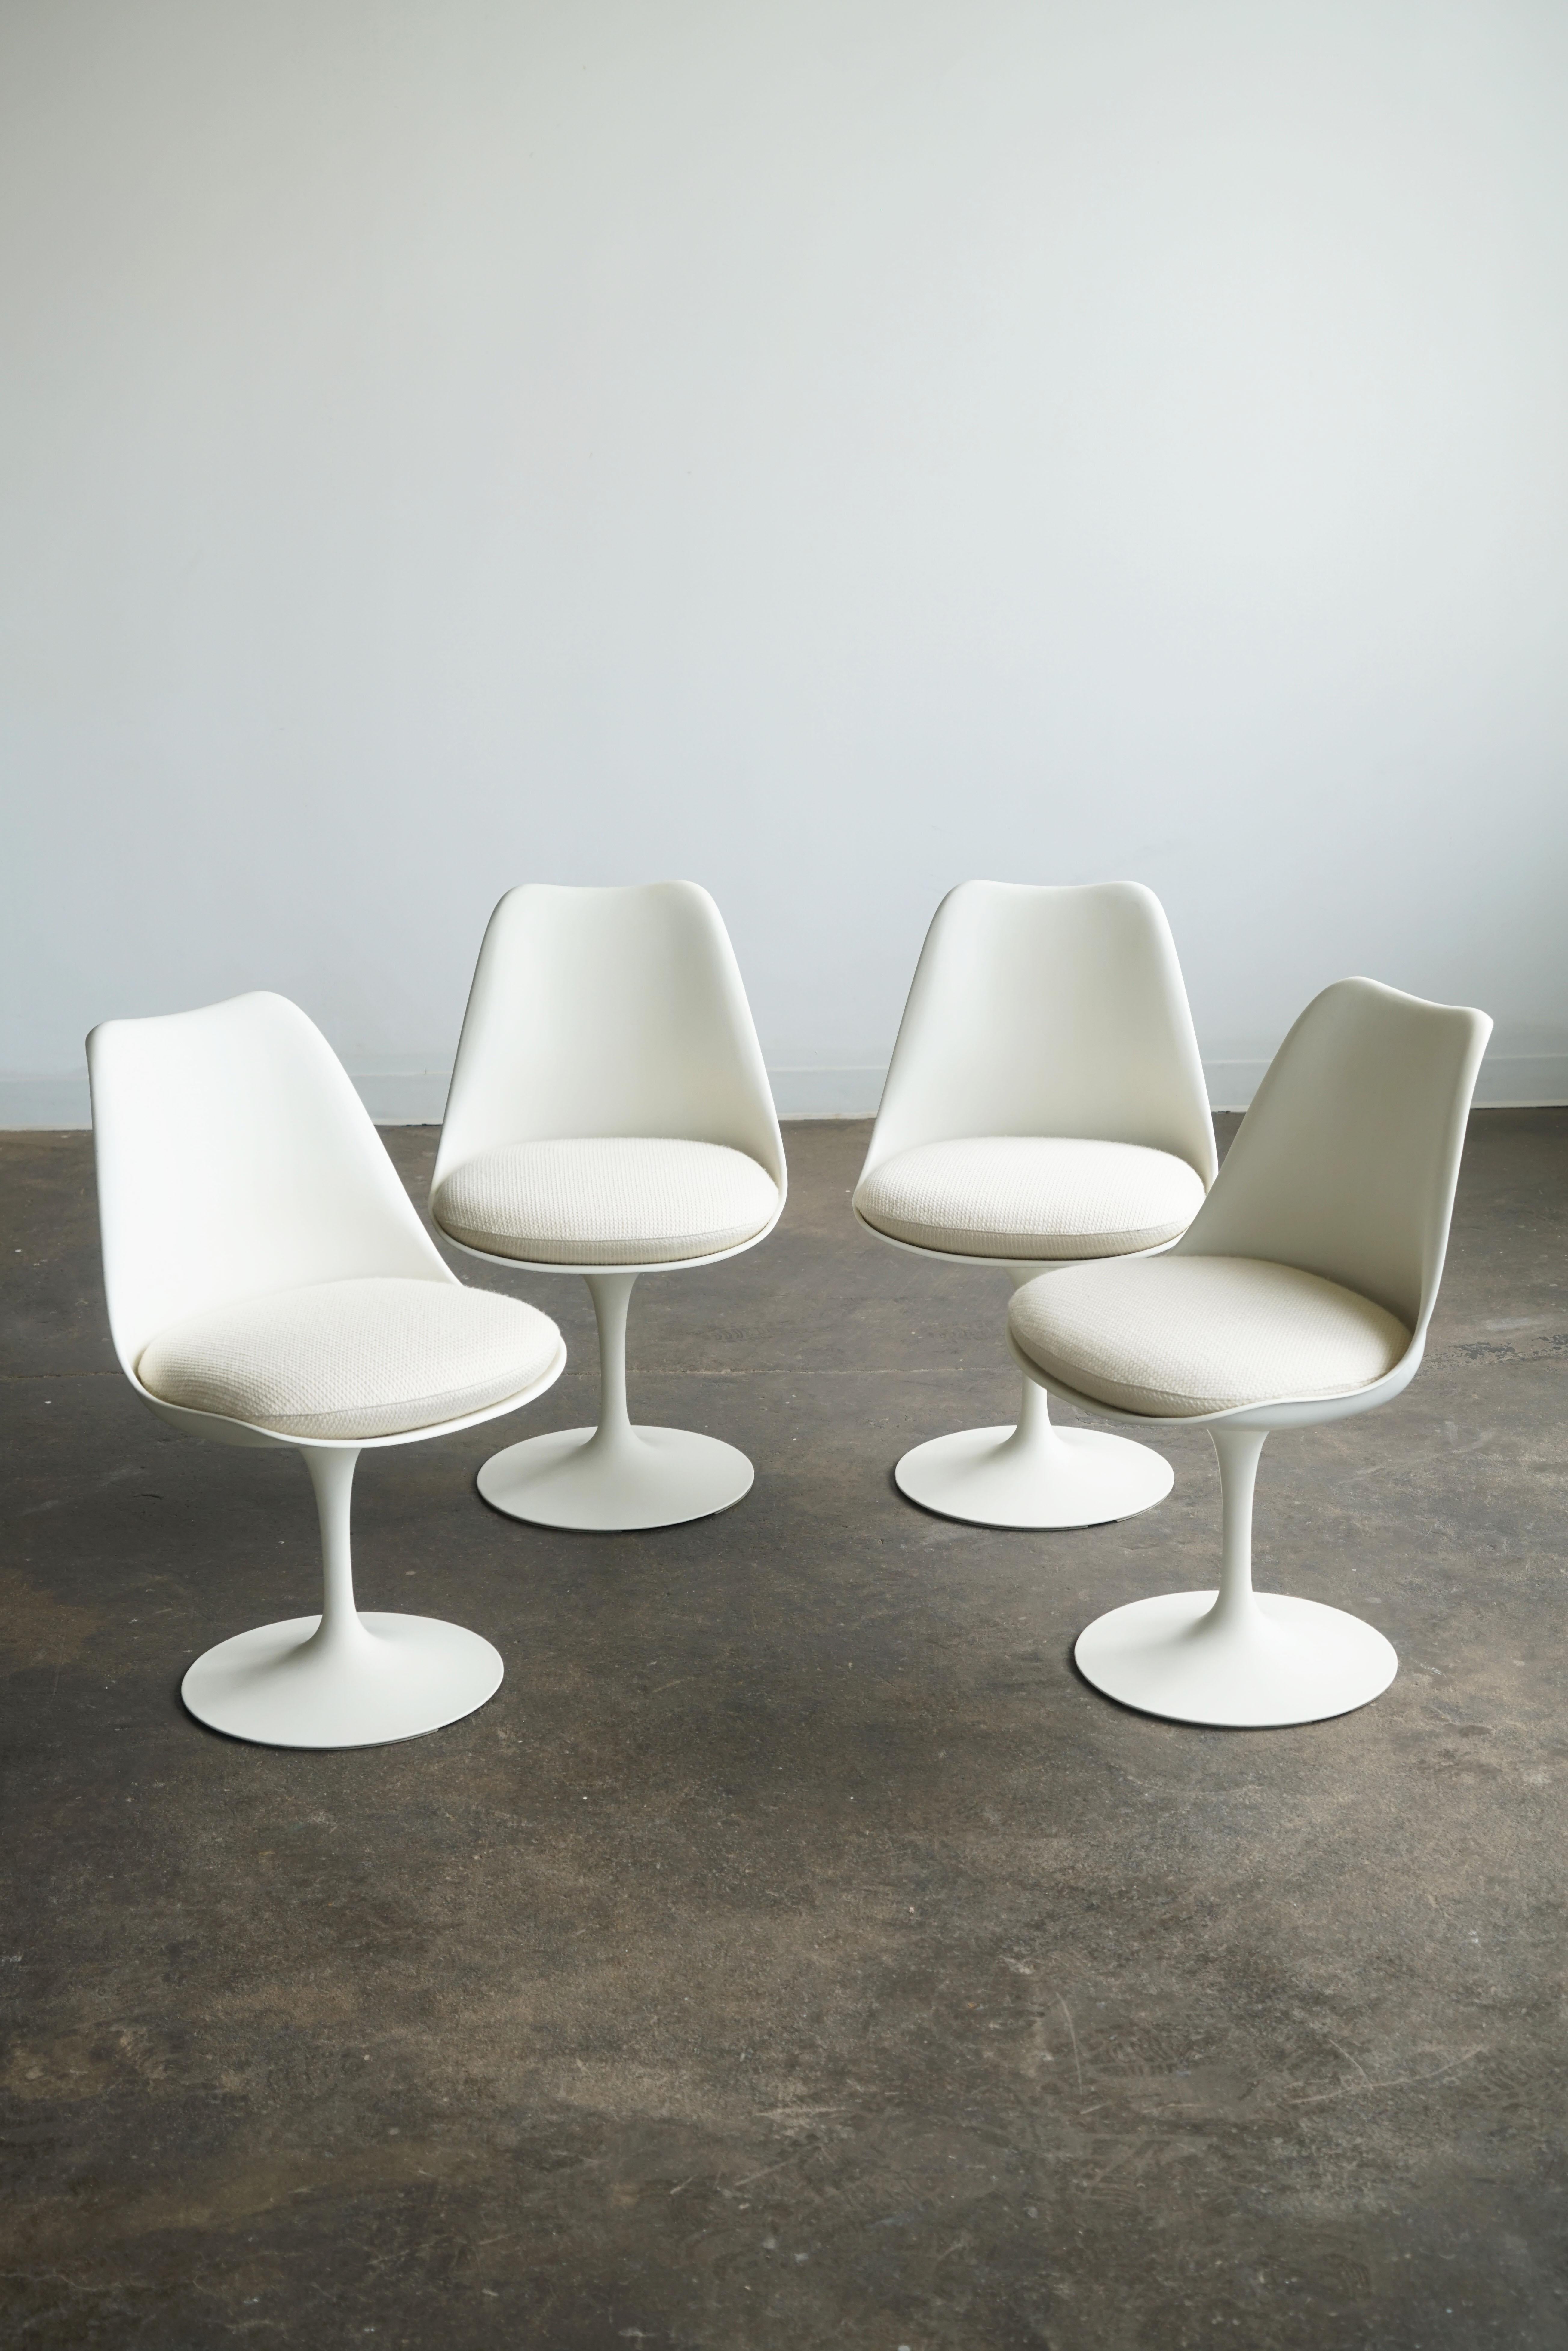 Eero Saarinen
Tulip chairs, armless with off-white upholstery. 
by Knoll, USA
Set of 4 chairs
Manufacturer 